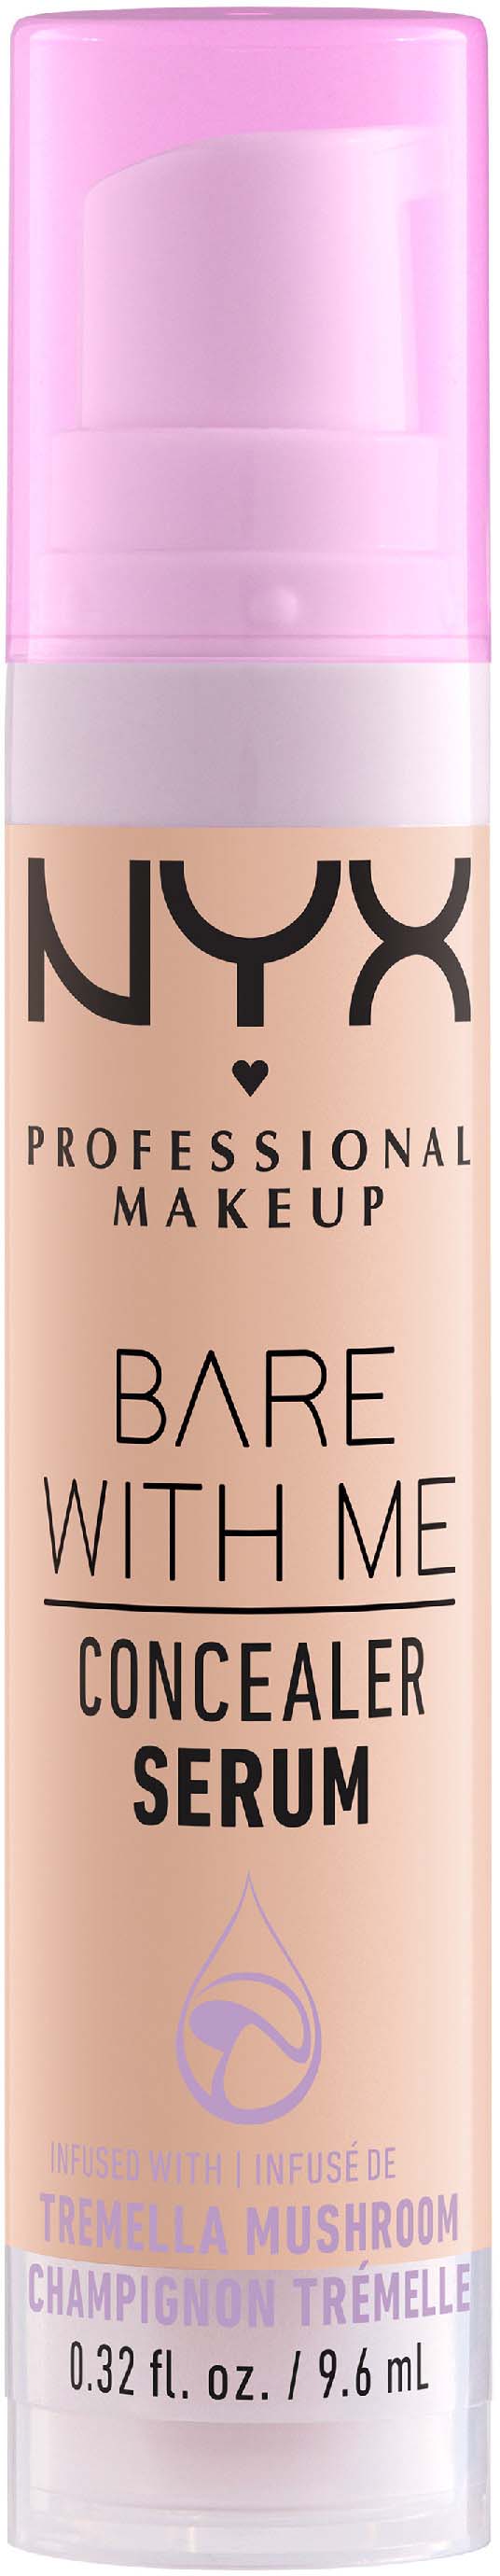 Concealer MAKEUP Me Light NYX Bare Serum With PROFESSIONAL